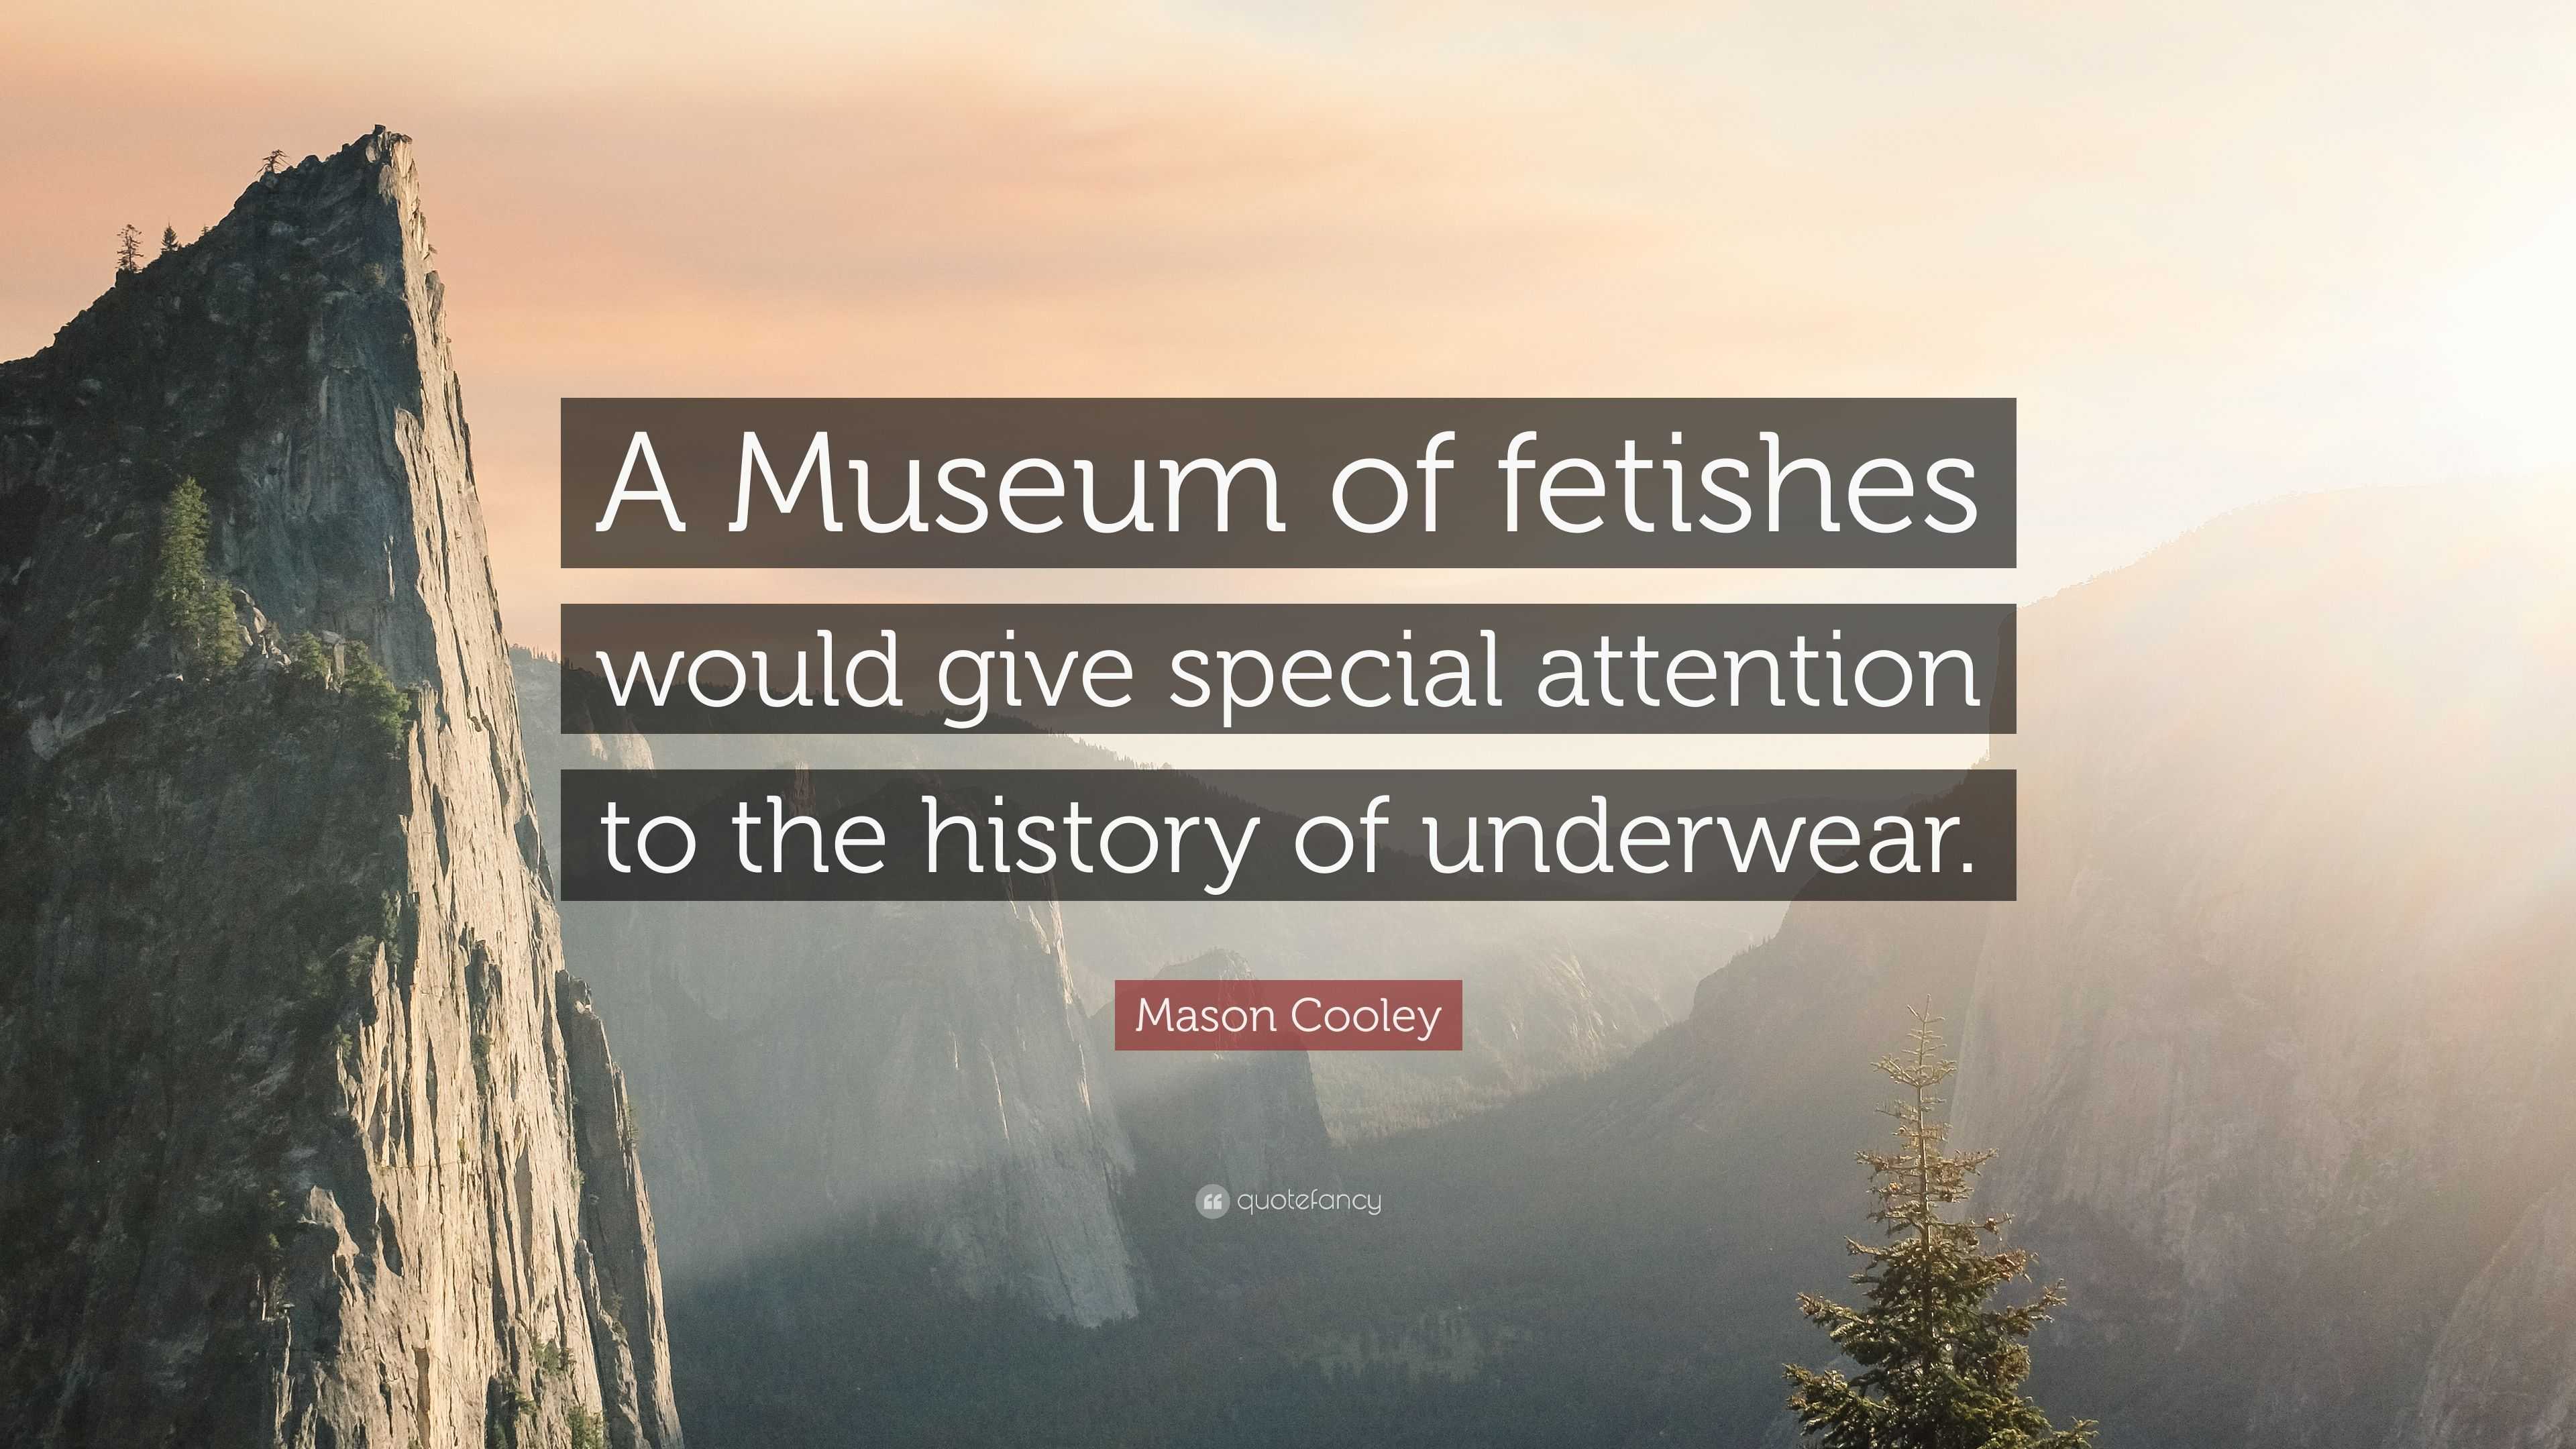 Mason Cooley Quote: “A Museum of fetishes would give special attention to  the history of underwear.”